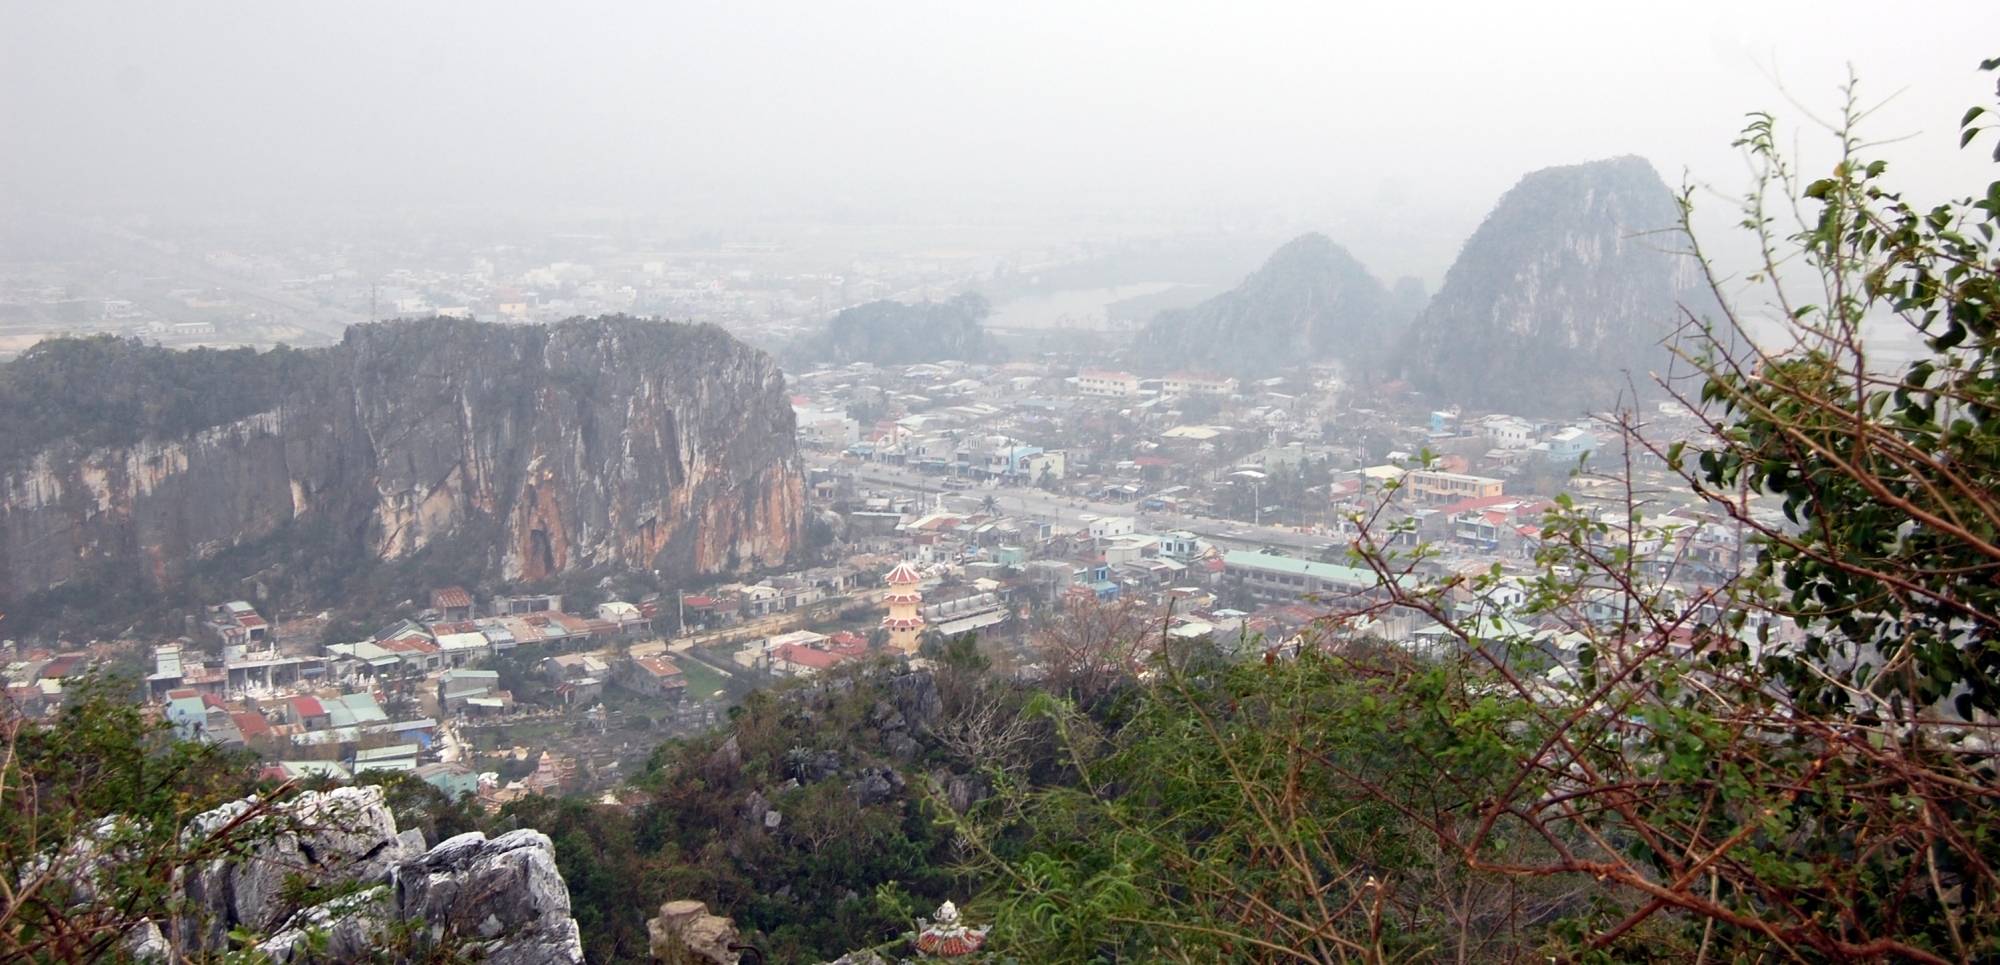 View from the top of Marble Mountains in Vietnam.